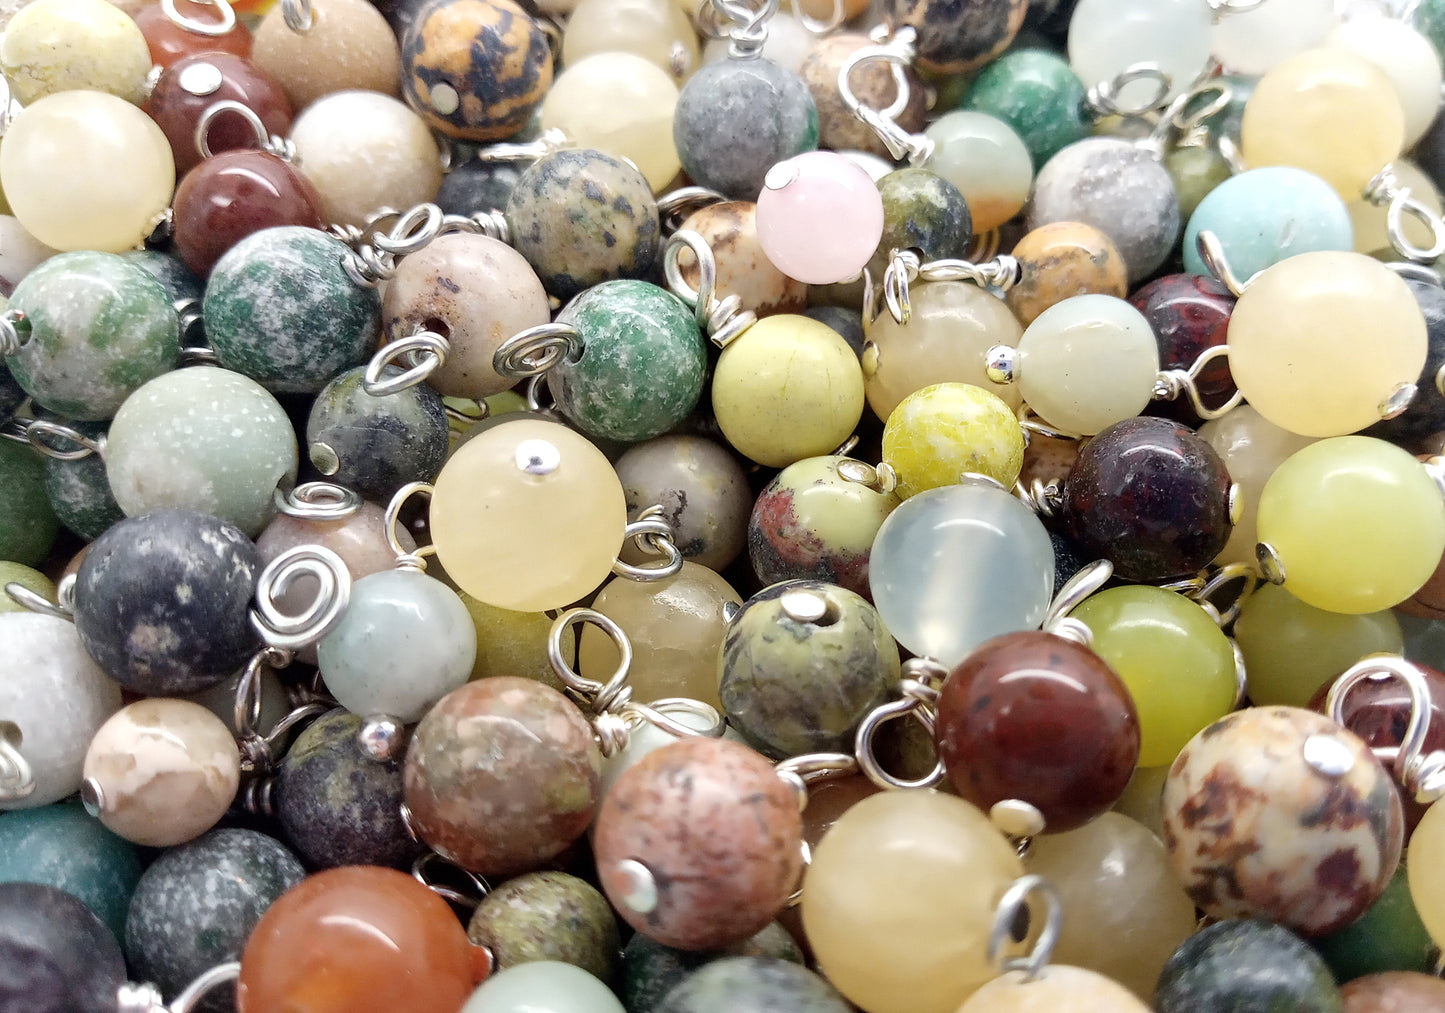 Mixed Gemstone Charms, Multicolored Stone Bead Dangles